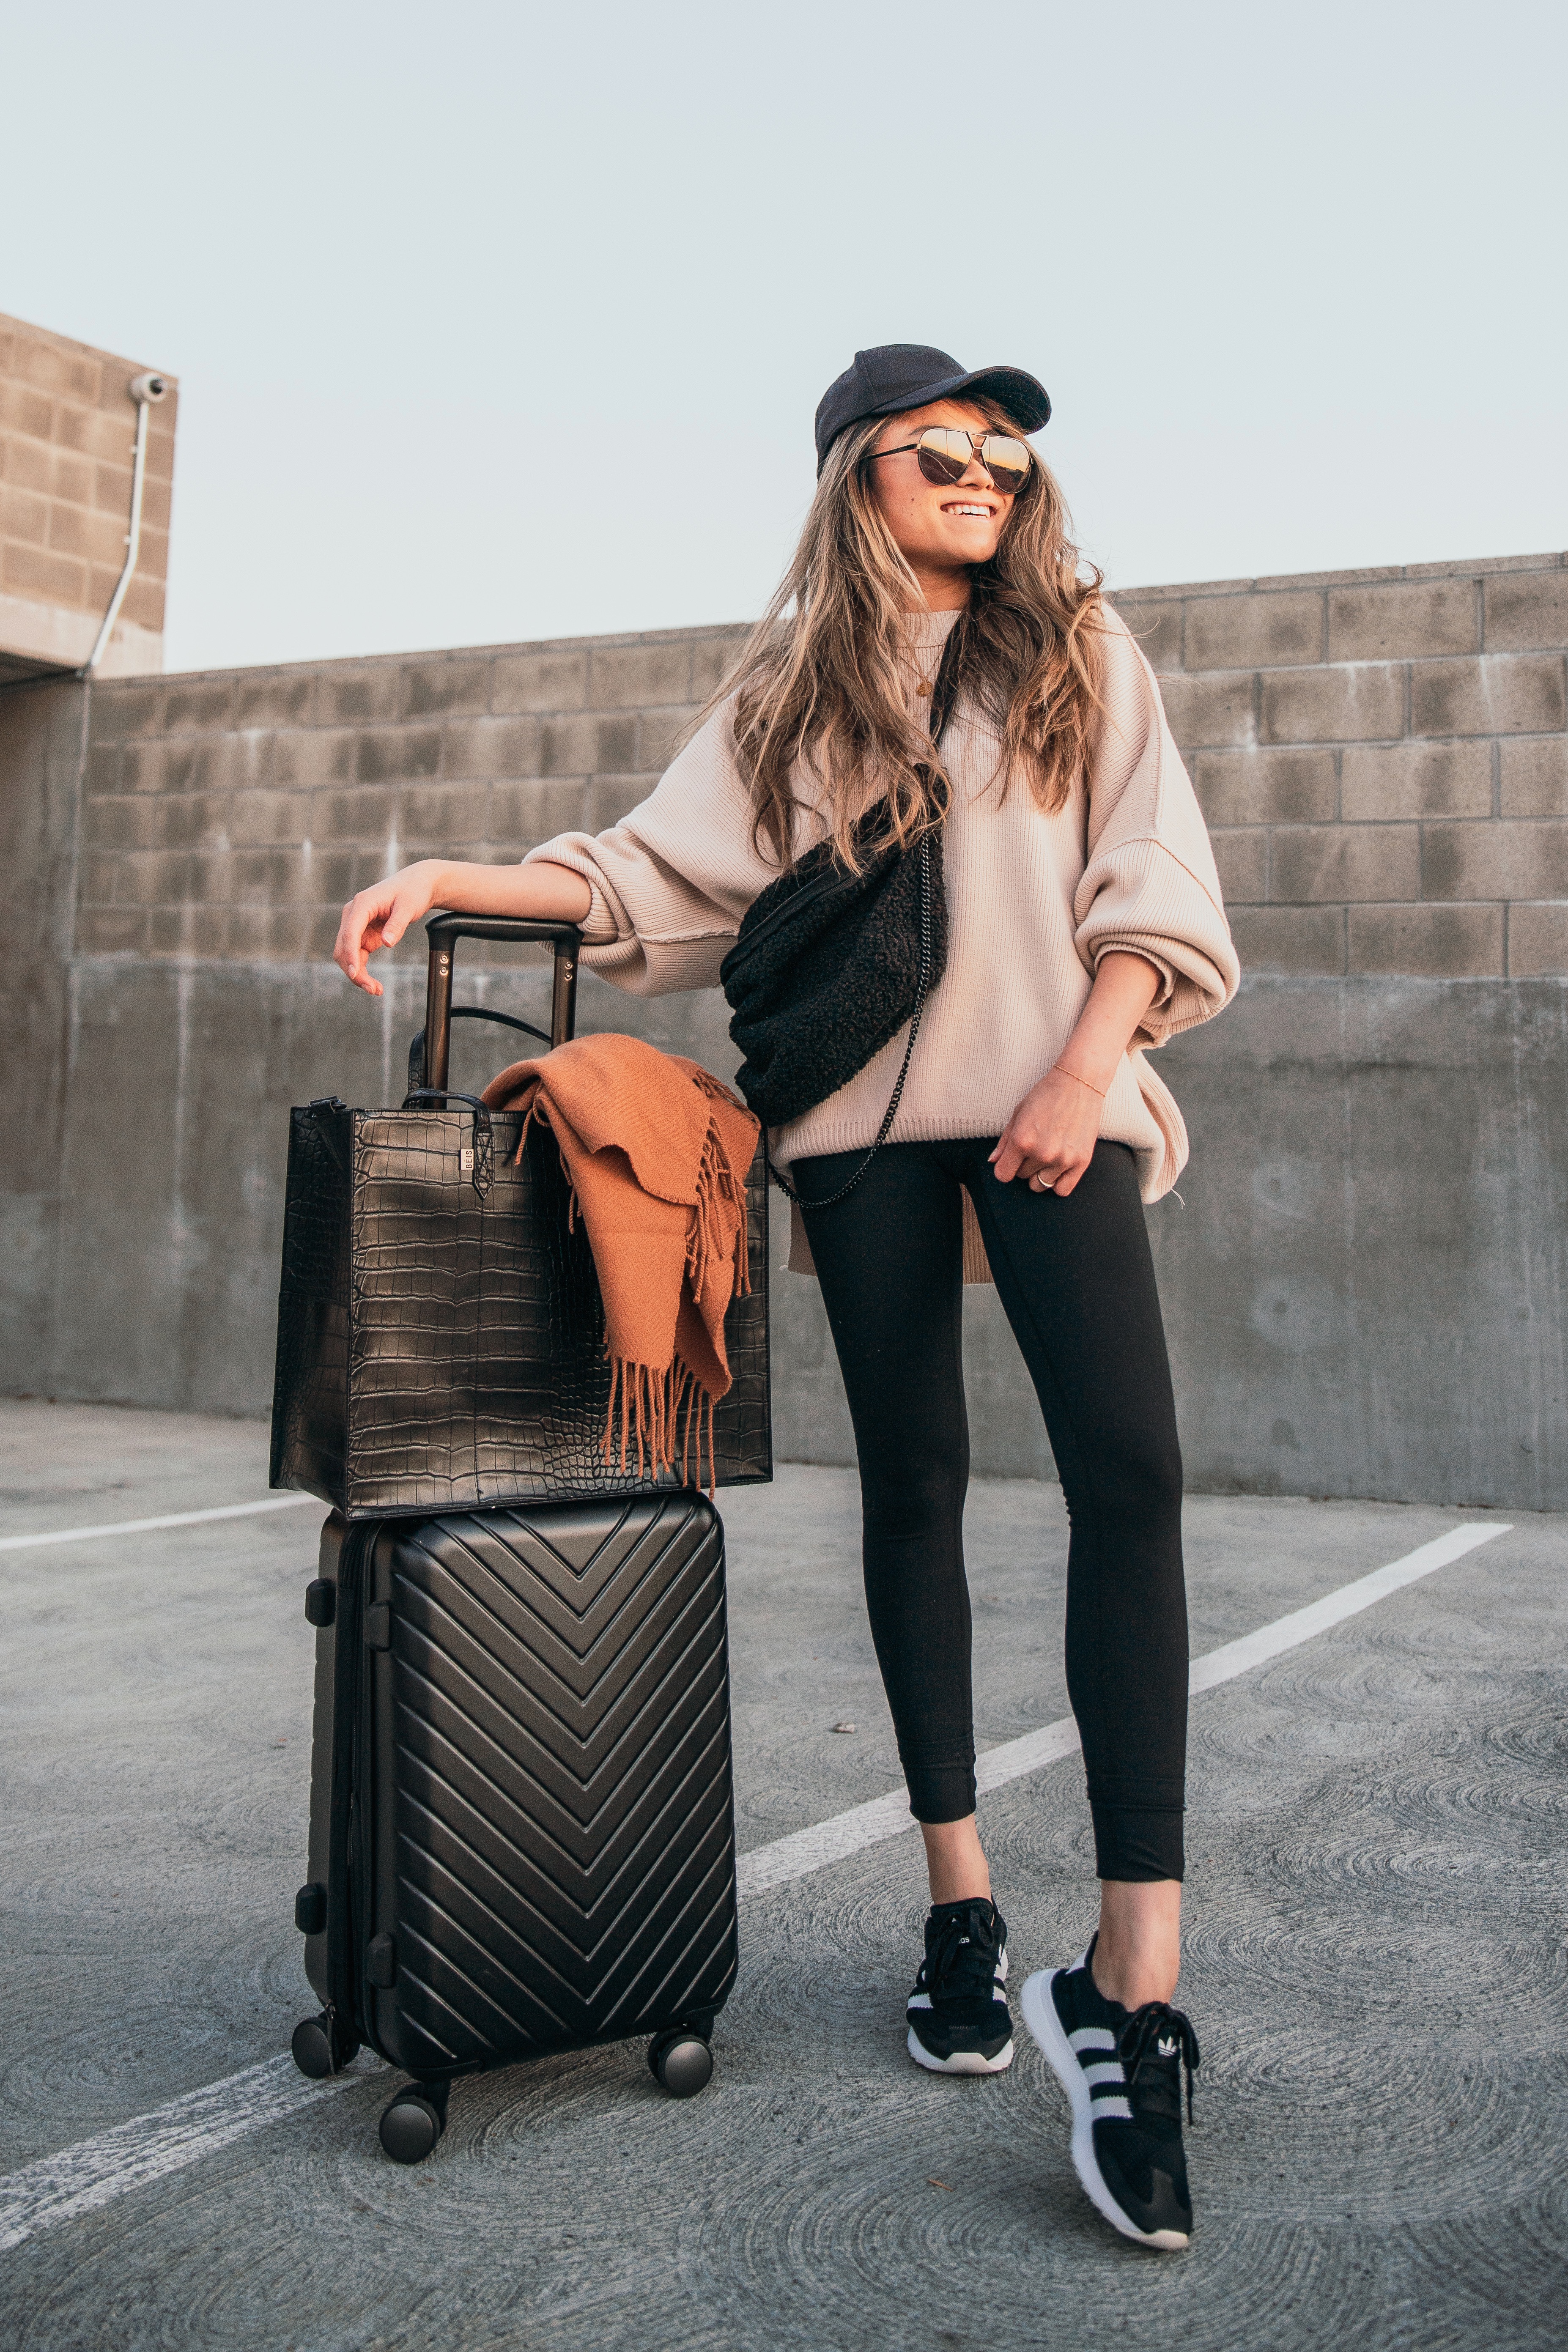 The Best Faux Leather Pieces In My Wardrobe - Under $150  Airport outfit,  Winter travel outfit, Louis vuitton luggage